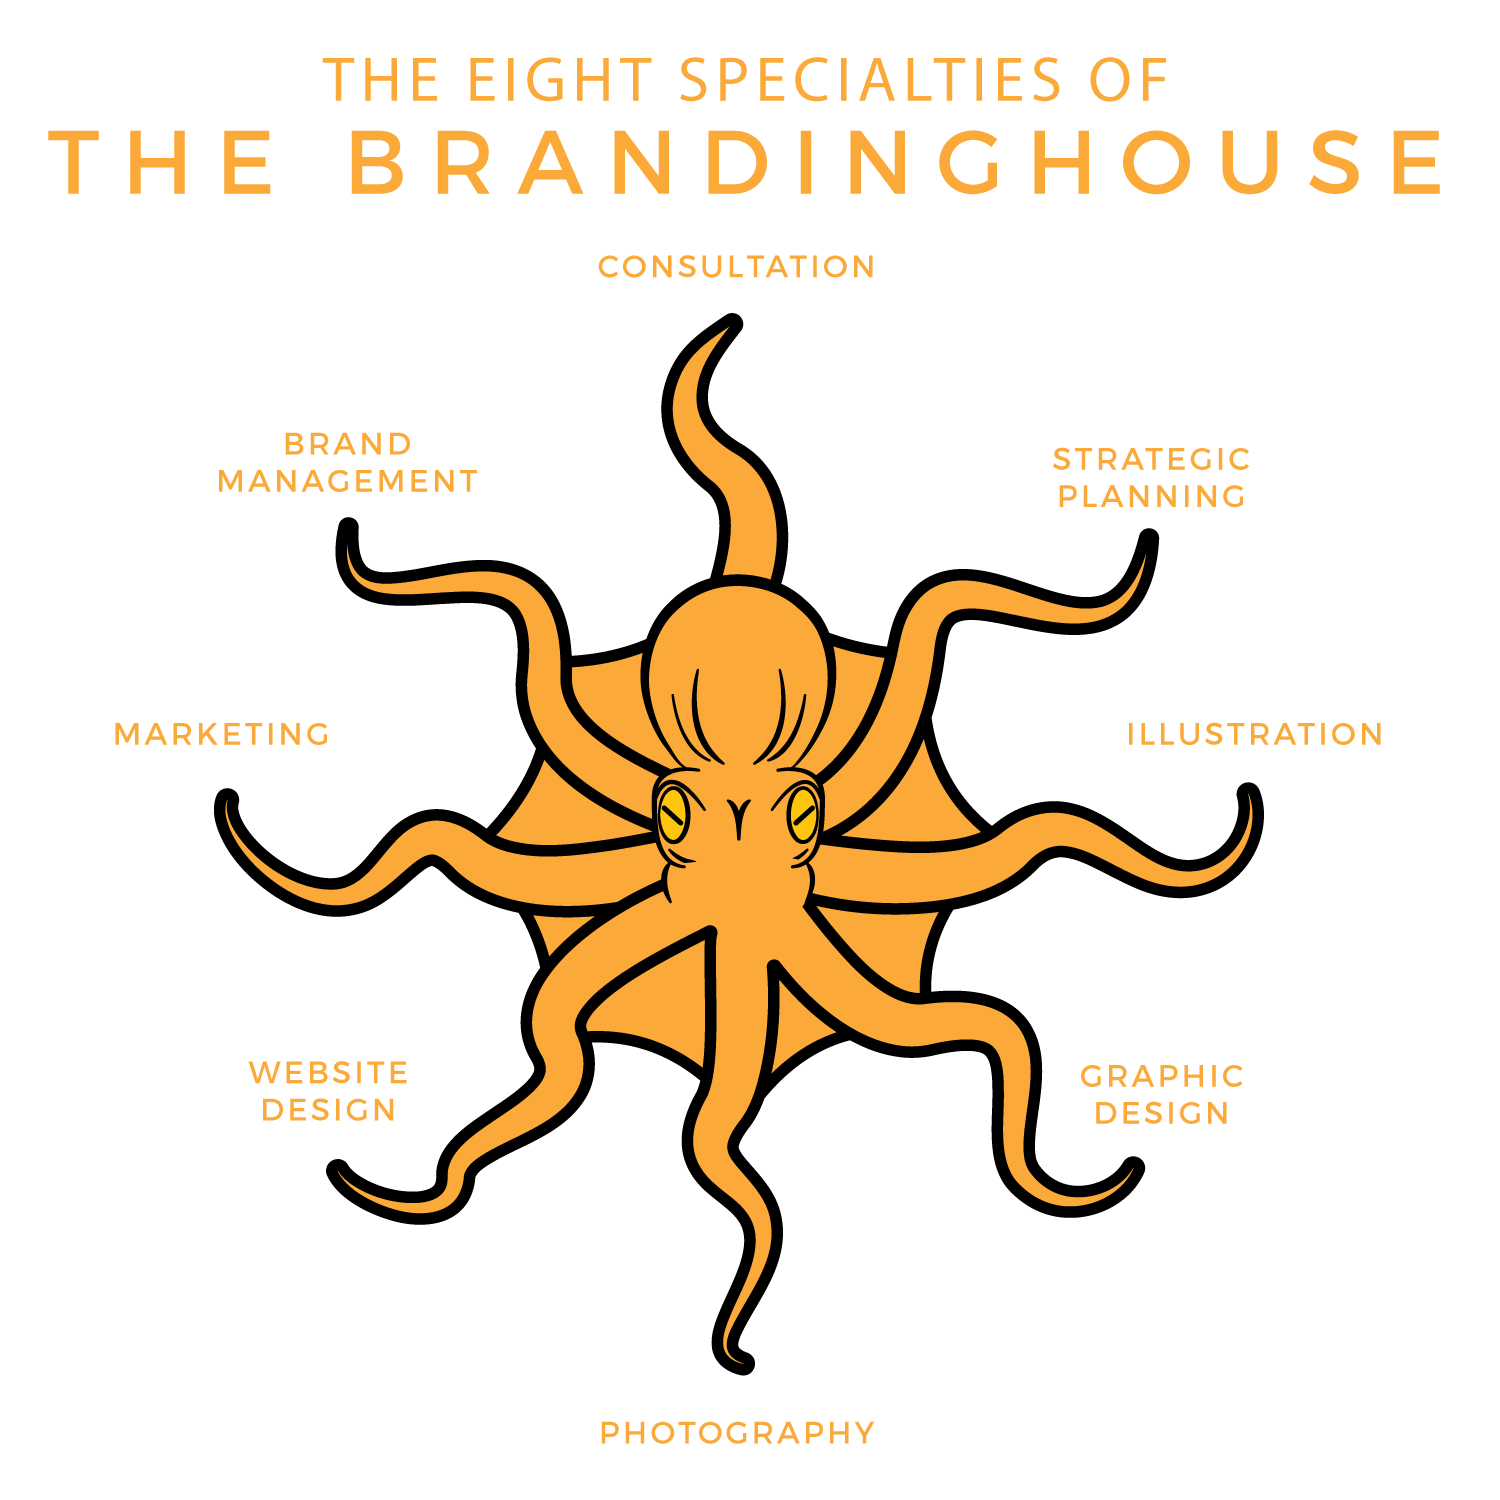 The Eight Specialties of the Brandinghouse